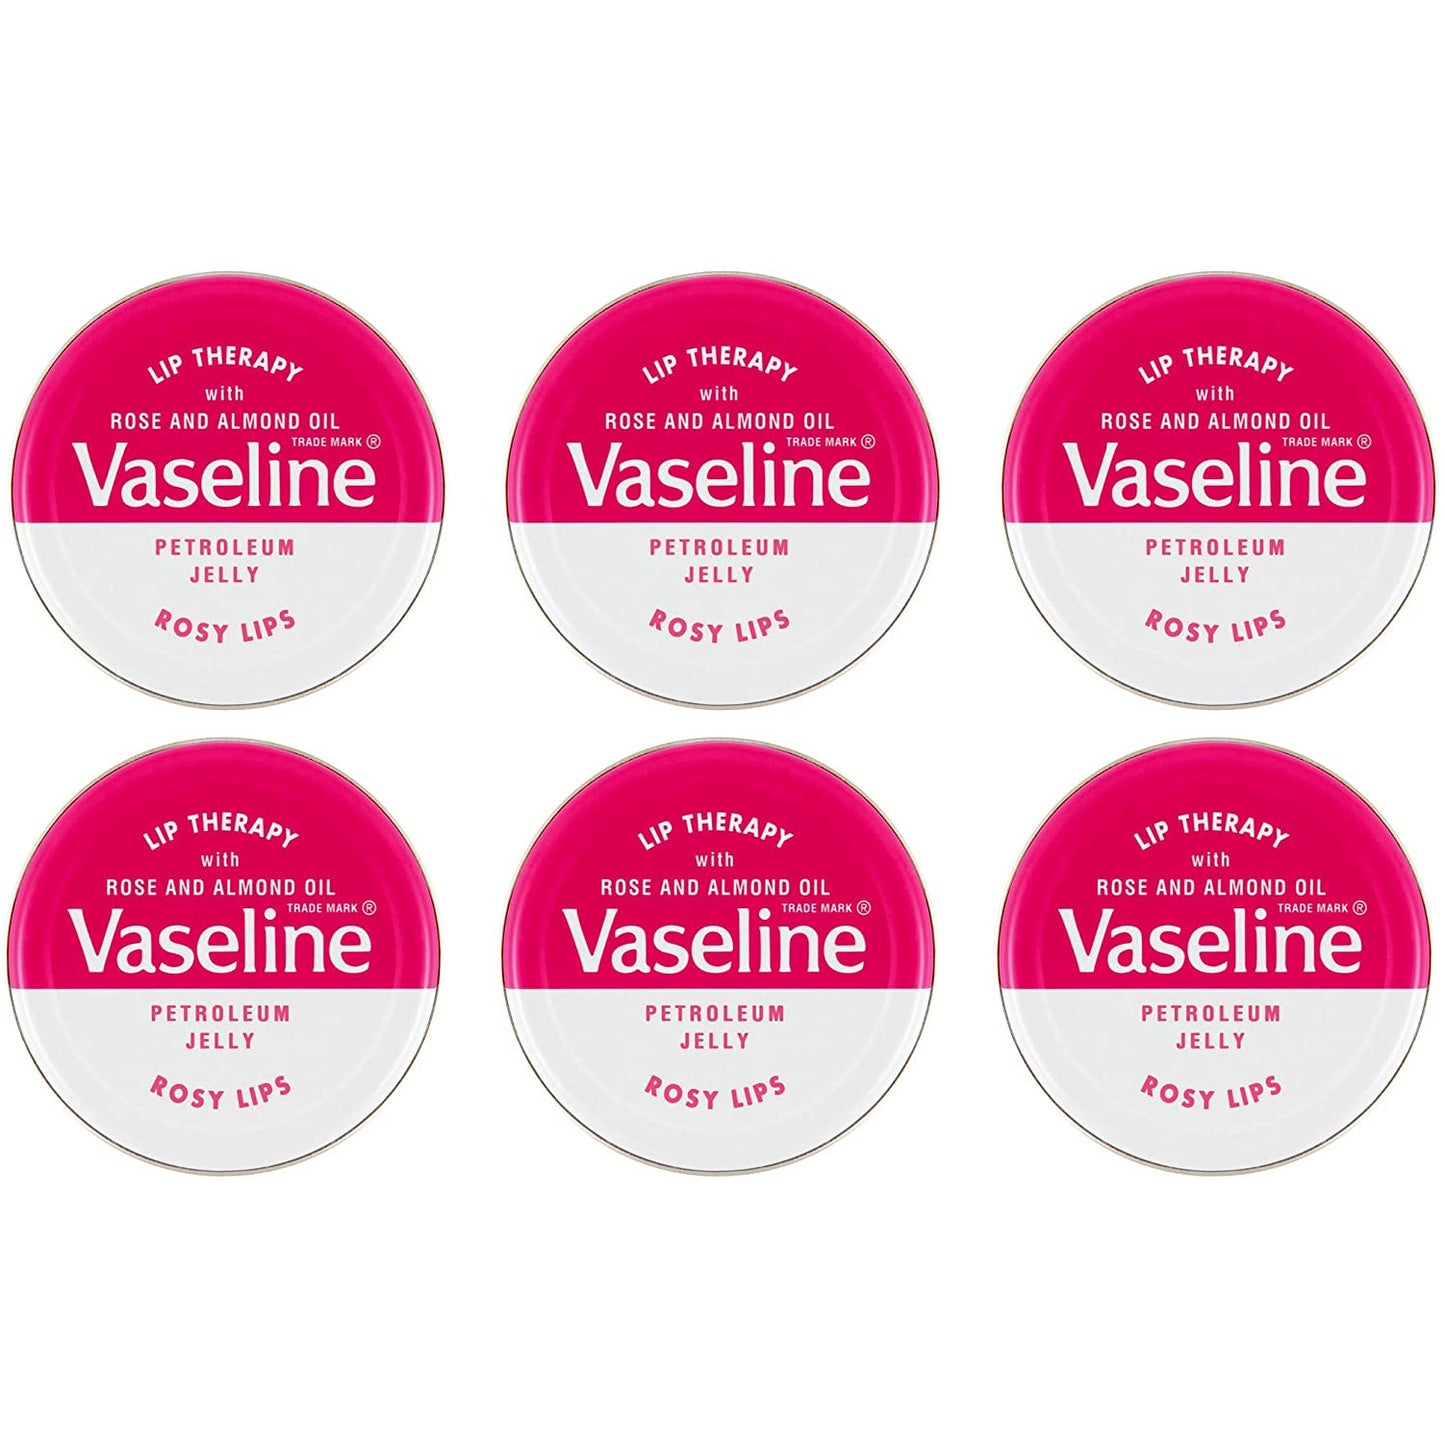 VASELINE 20G LIP THERAPY PETROLEUM JELLY ROSY LIPS